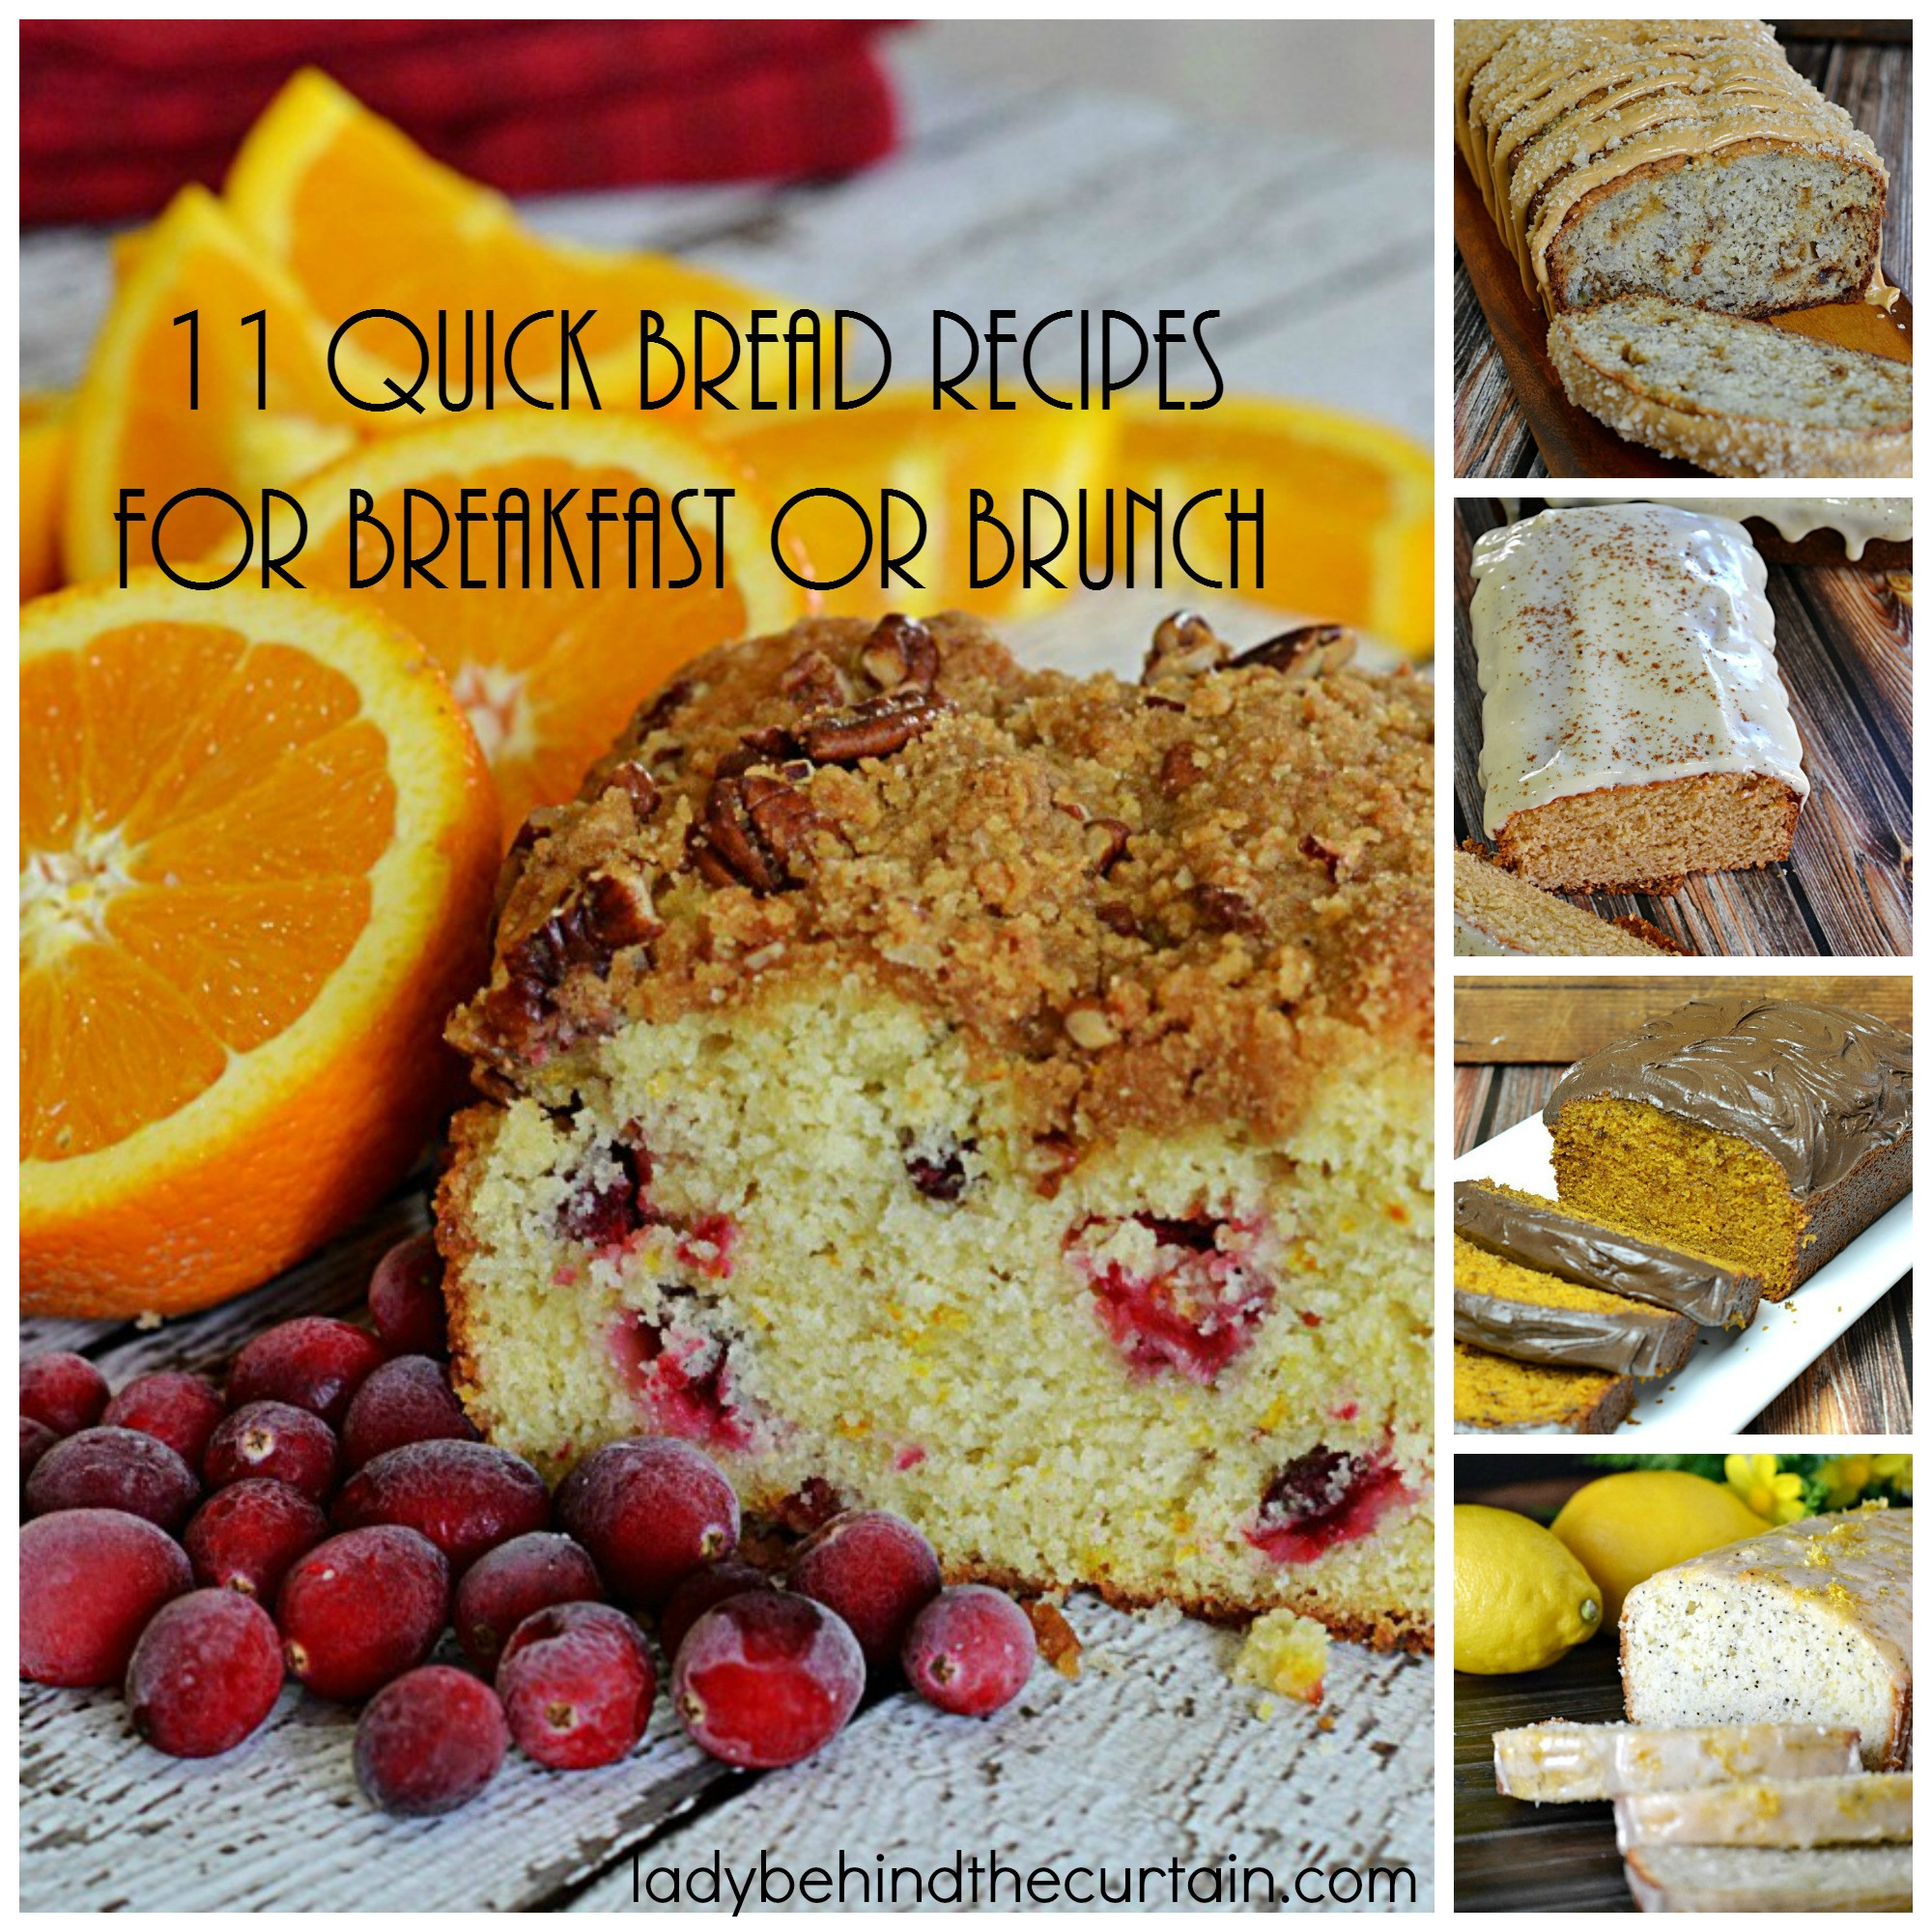 Quick Breakfast Recipes With Bread
 11 Quick Bread Recipes for Breakfast or Brunch